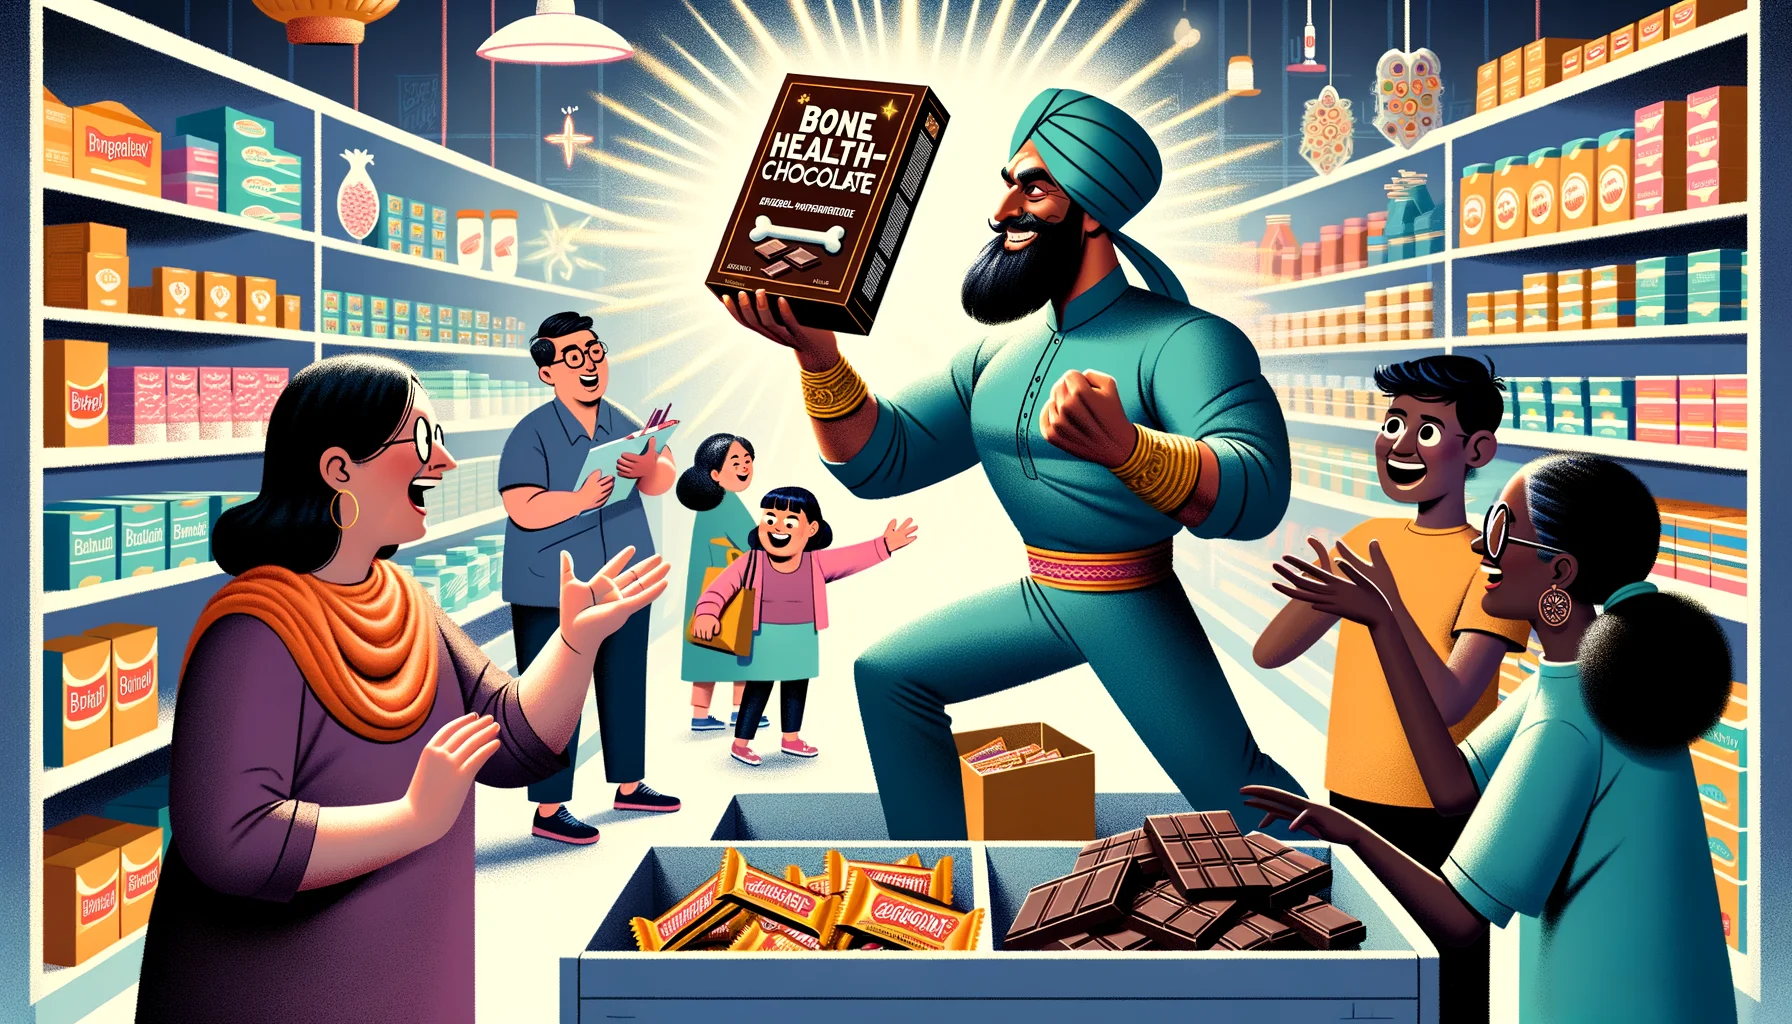 A hilarious scene in a health food store, where a Caucasian woman and a Black man are selecting a box called 'Bone Health-Enhancing Chocolate'. The shop assistant, a Middle-Eastern man, is showing super-human strength by picking up heavy items with ease, indicating the effectiveness of the product. The box of chocolates is glowing, indicating it's healthy and magical. Other customers, such as a South Asian woman and a Hispanic boy, are reaching out for the box in a fun, exaggerated manner. The background includes shelves stacked with other healthy products.